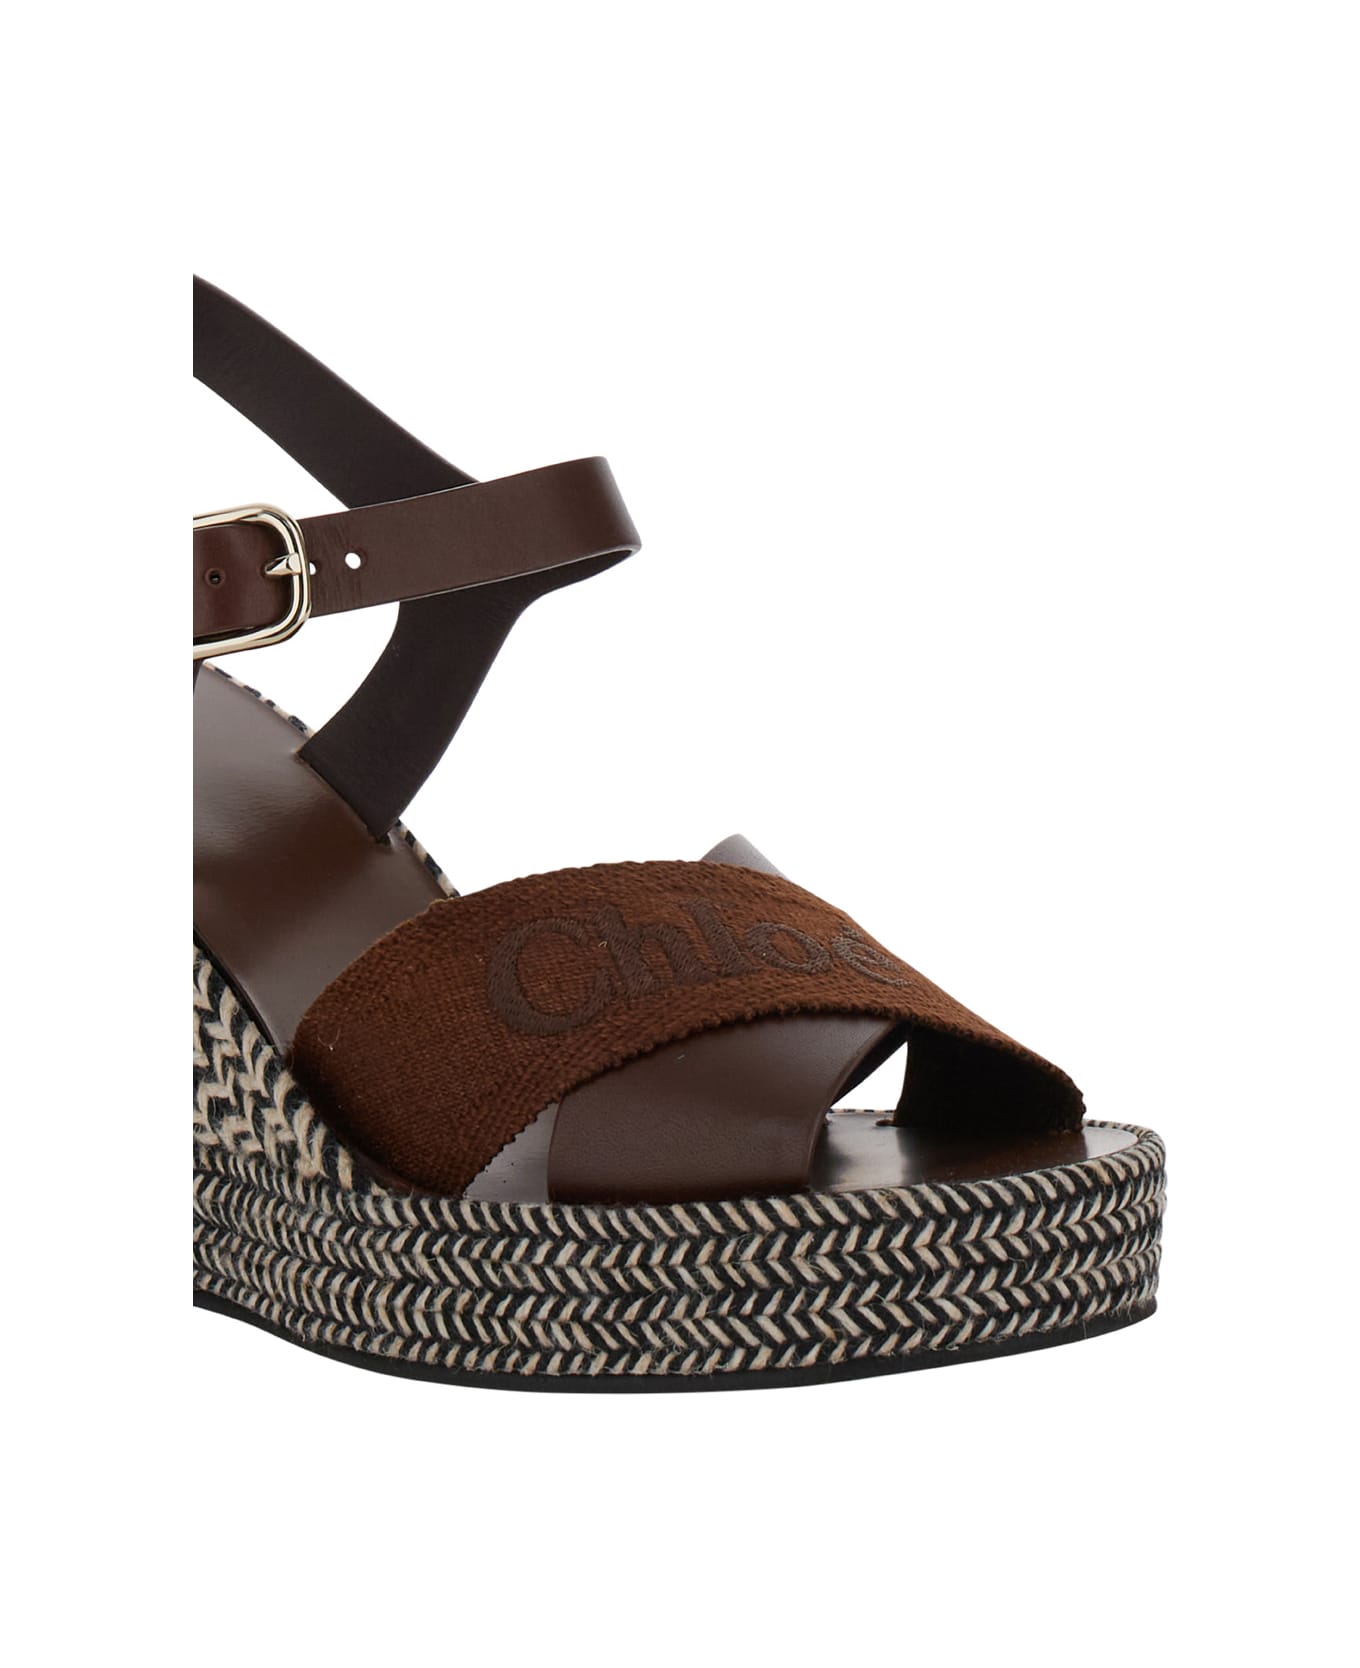 Chloé Espadrillas Sandals With Wedge In Leather And Jute - Brown サンダル